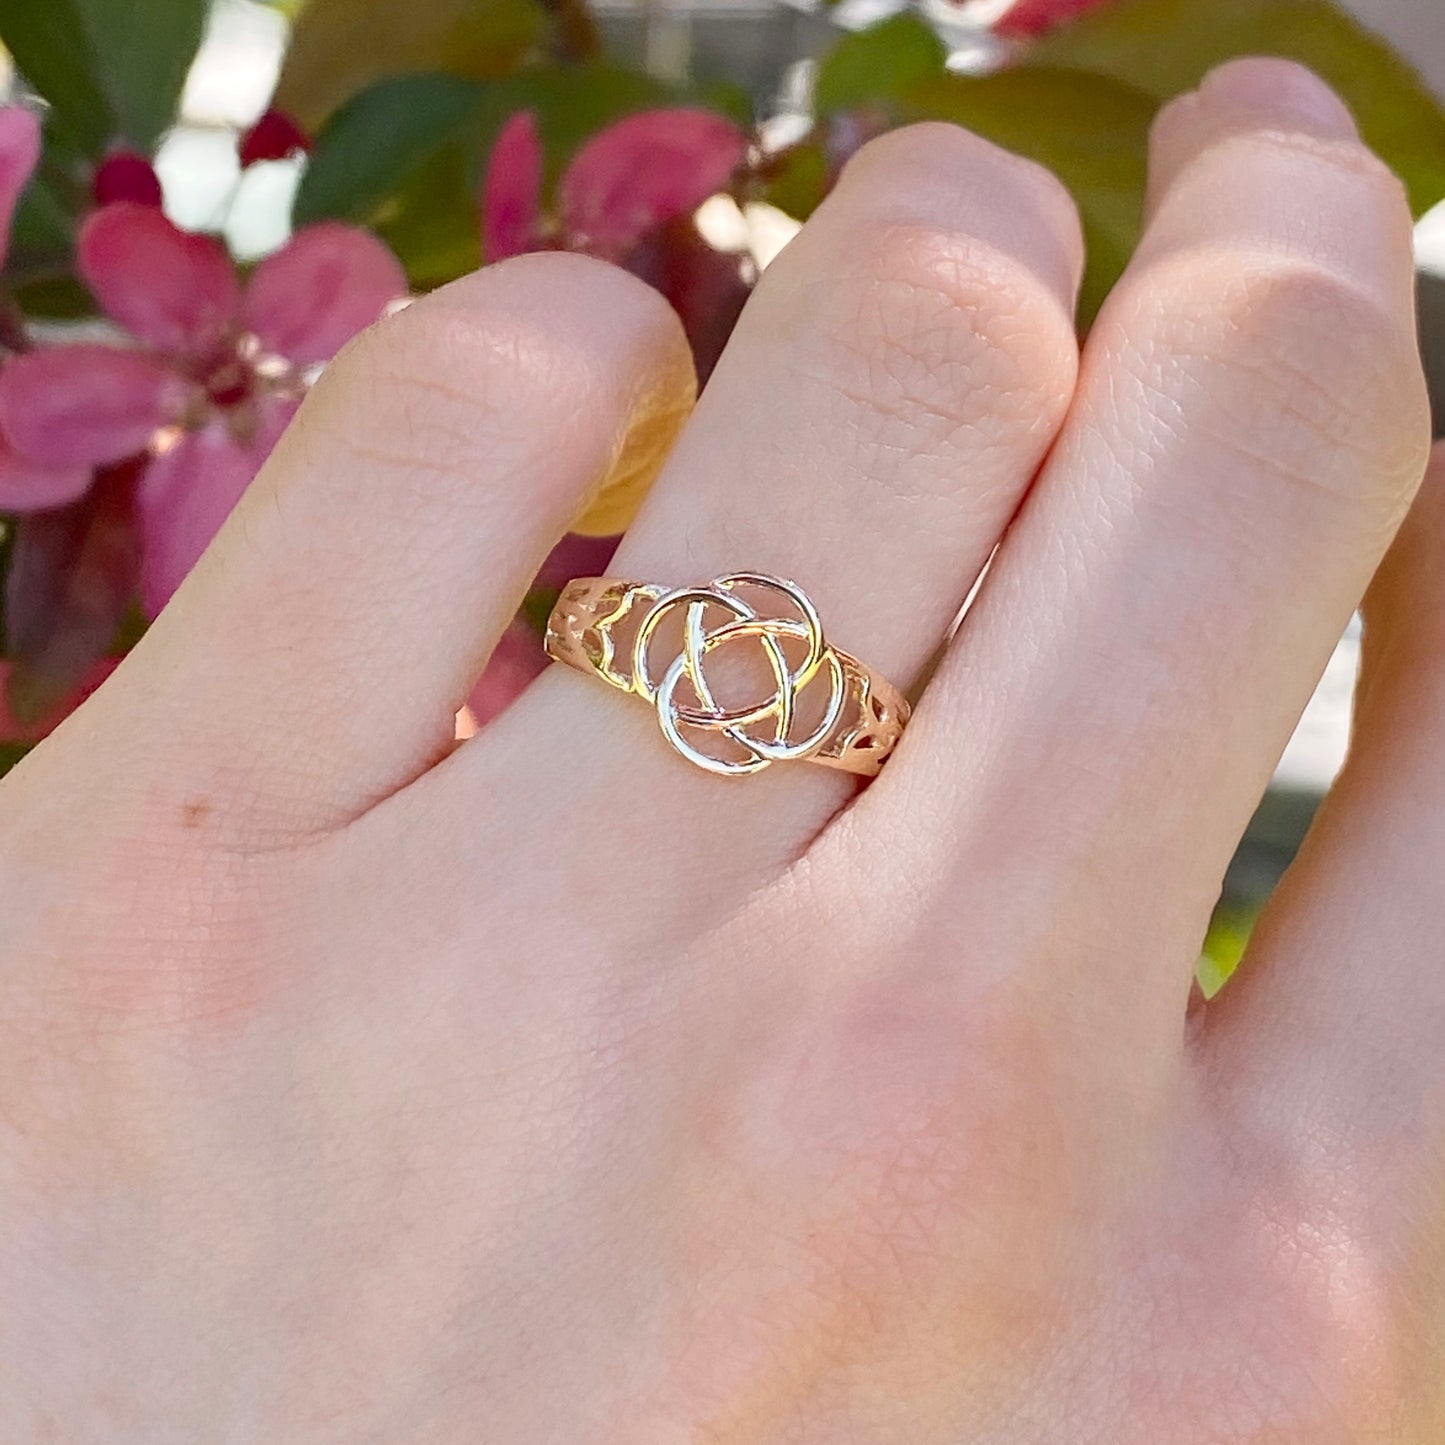 14KT Yellow Gold Polished Celtic Knot Weave Design Ring, 14KT Yellow Gold Polished Celtic Knot Weave Design Ring - Legacy Saint Jewelry